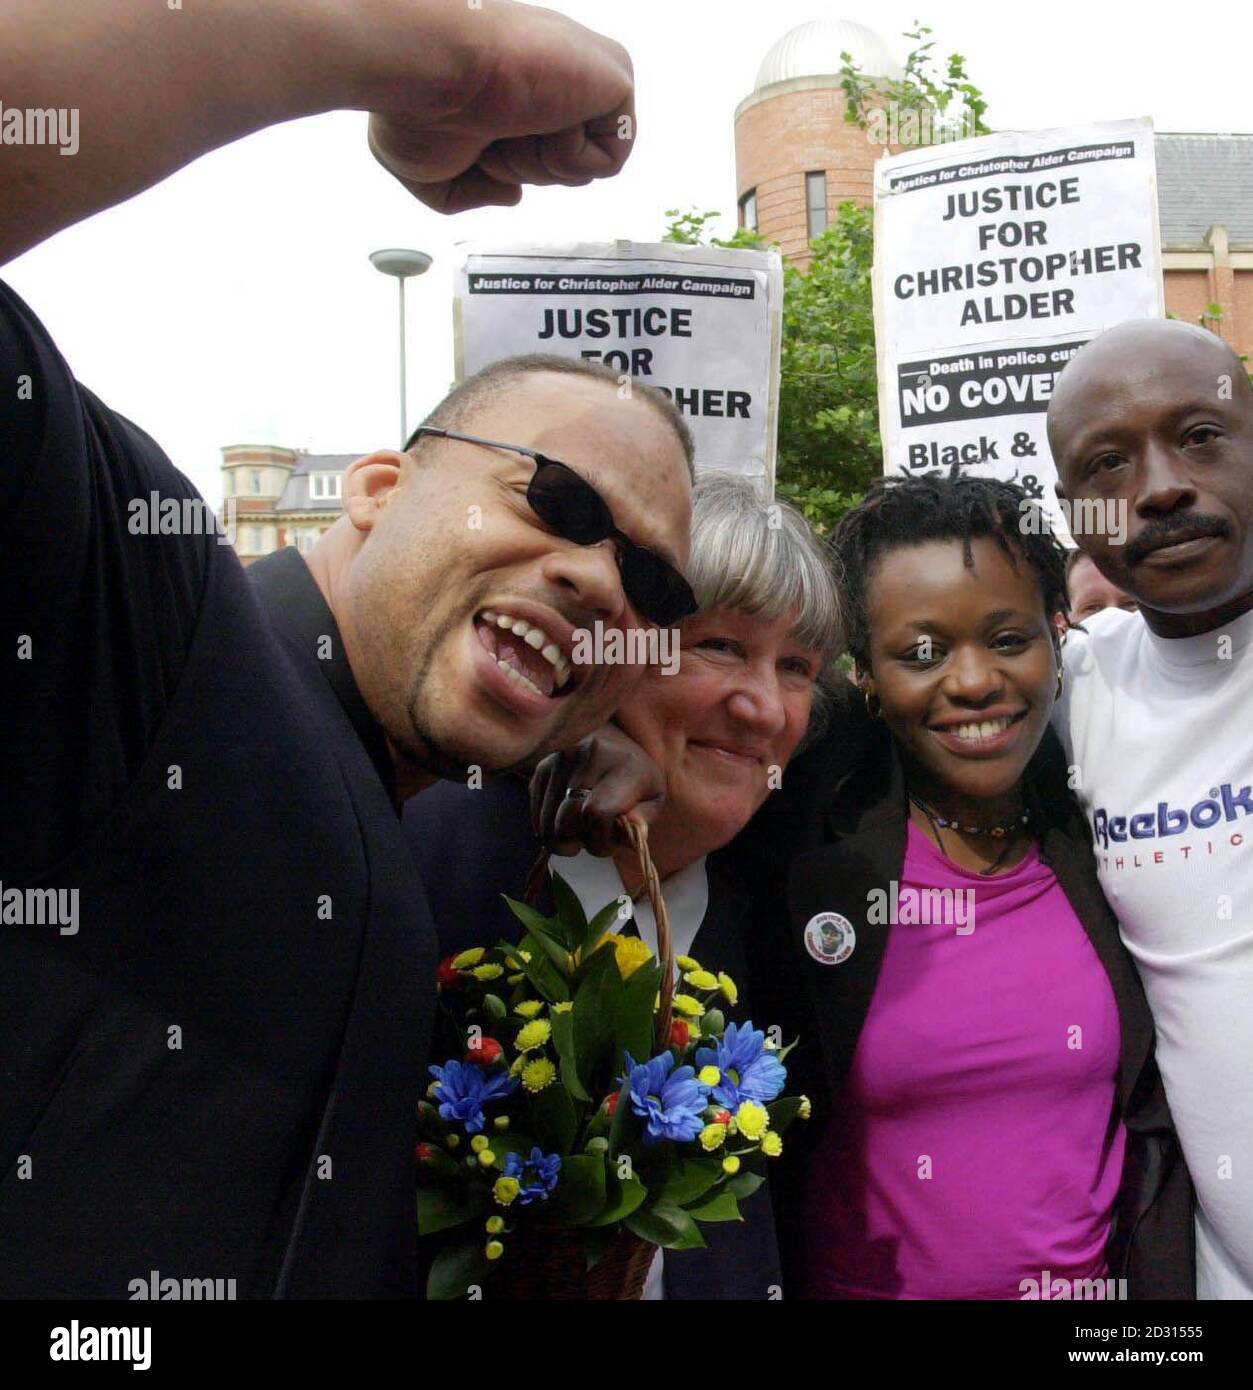 Janet Alder, centre right, who has campaigned for justice in the death of her brother Christopher Alder, a black former paratrooper who died in handcuffs in police custody, stands with her brother Richard, right, supporter Ruggi Johnson, left. * and solicitor Ruth Bundy, outside Hull Crown Court, where an inquest ruled the death an unlawful killing. Christopher Alder, 37, who was decorated for his service with the Army in Northern Ireland, died with his hands cuffed behind his back and his trousers around his knees on the floor of the custody suite of Queen's Gardens police station in Hul Stock Photo